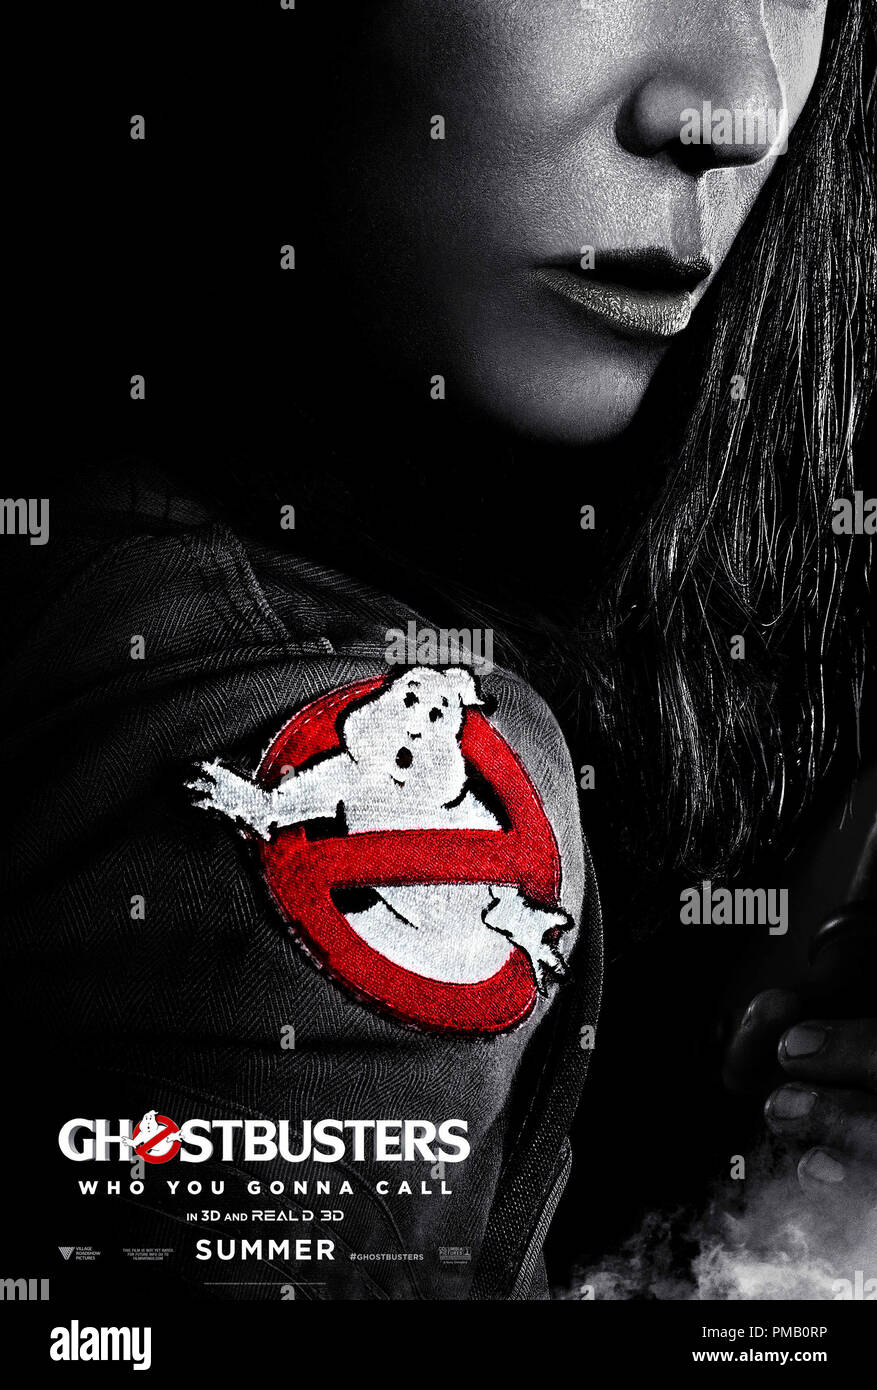 Ghostbusters 3 Movie Poster